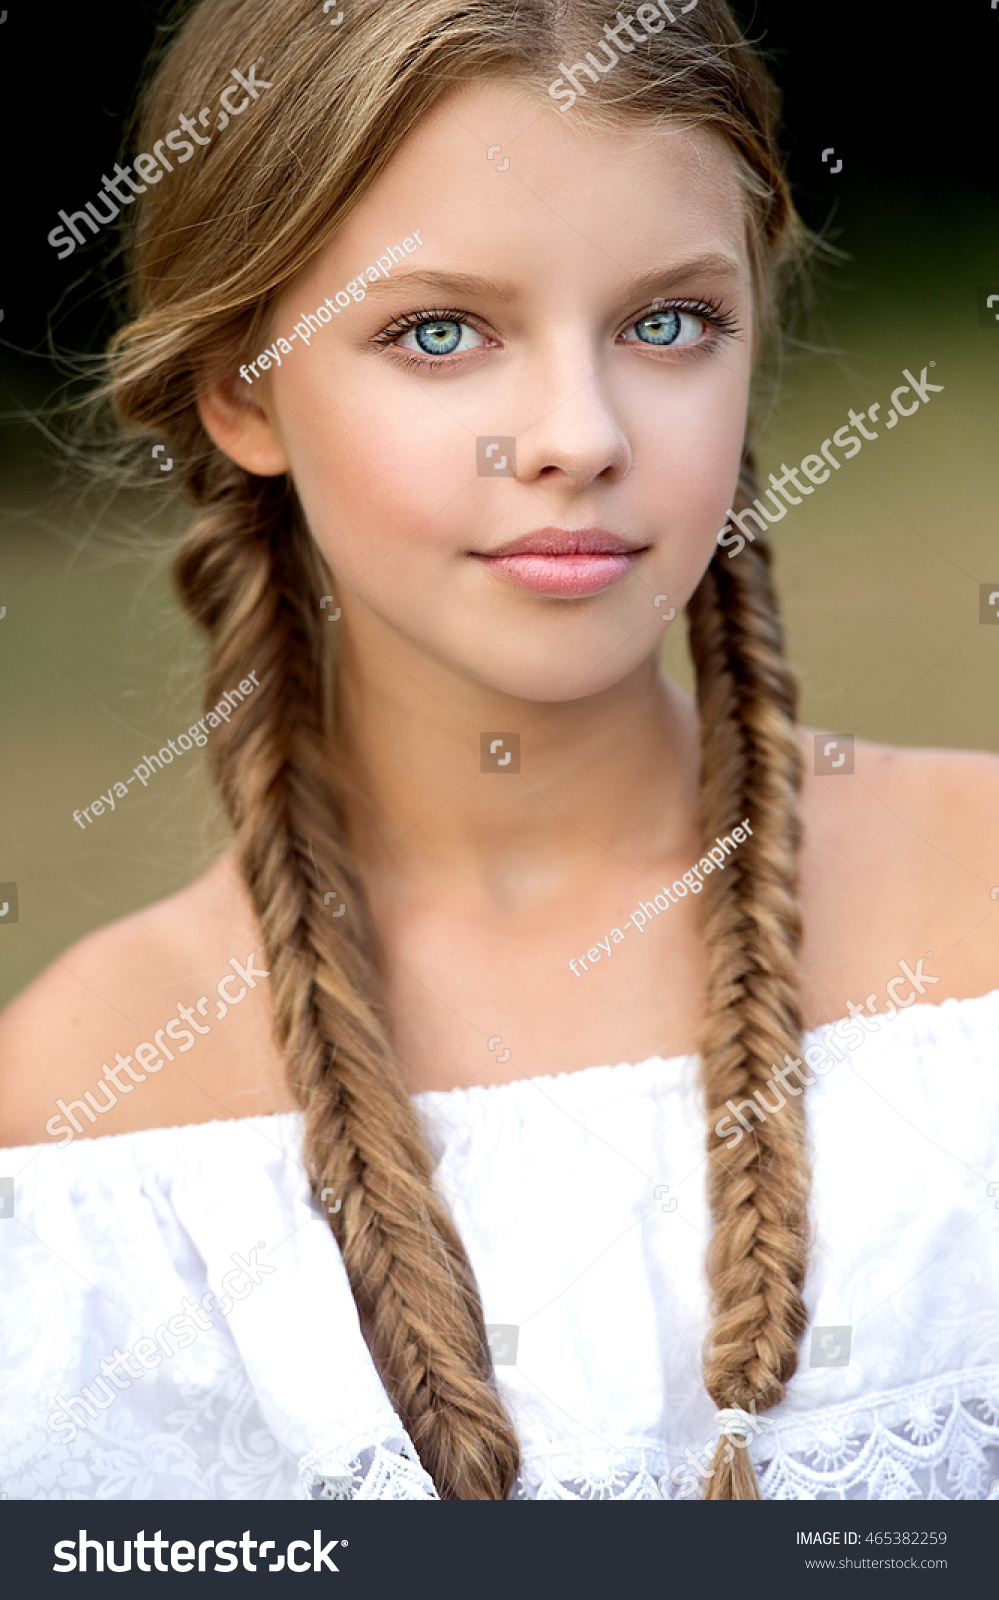 Pigtails Picture